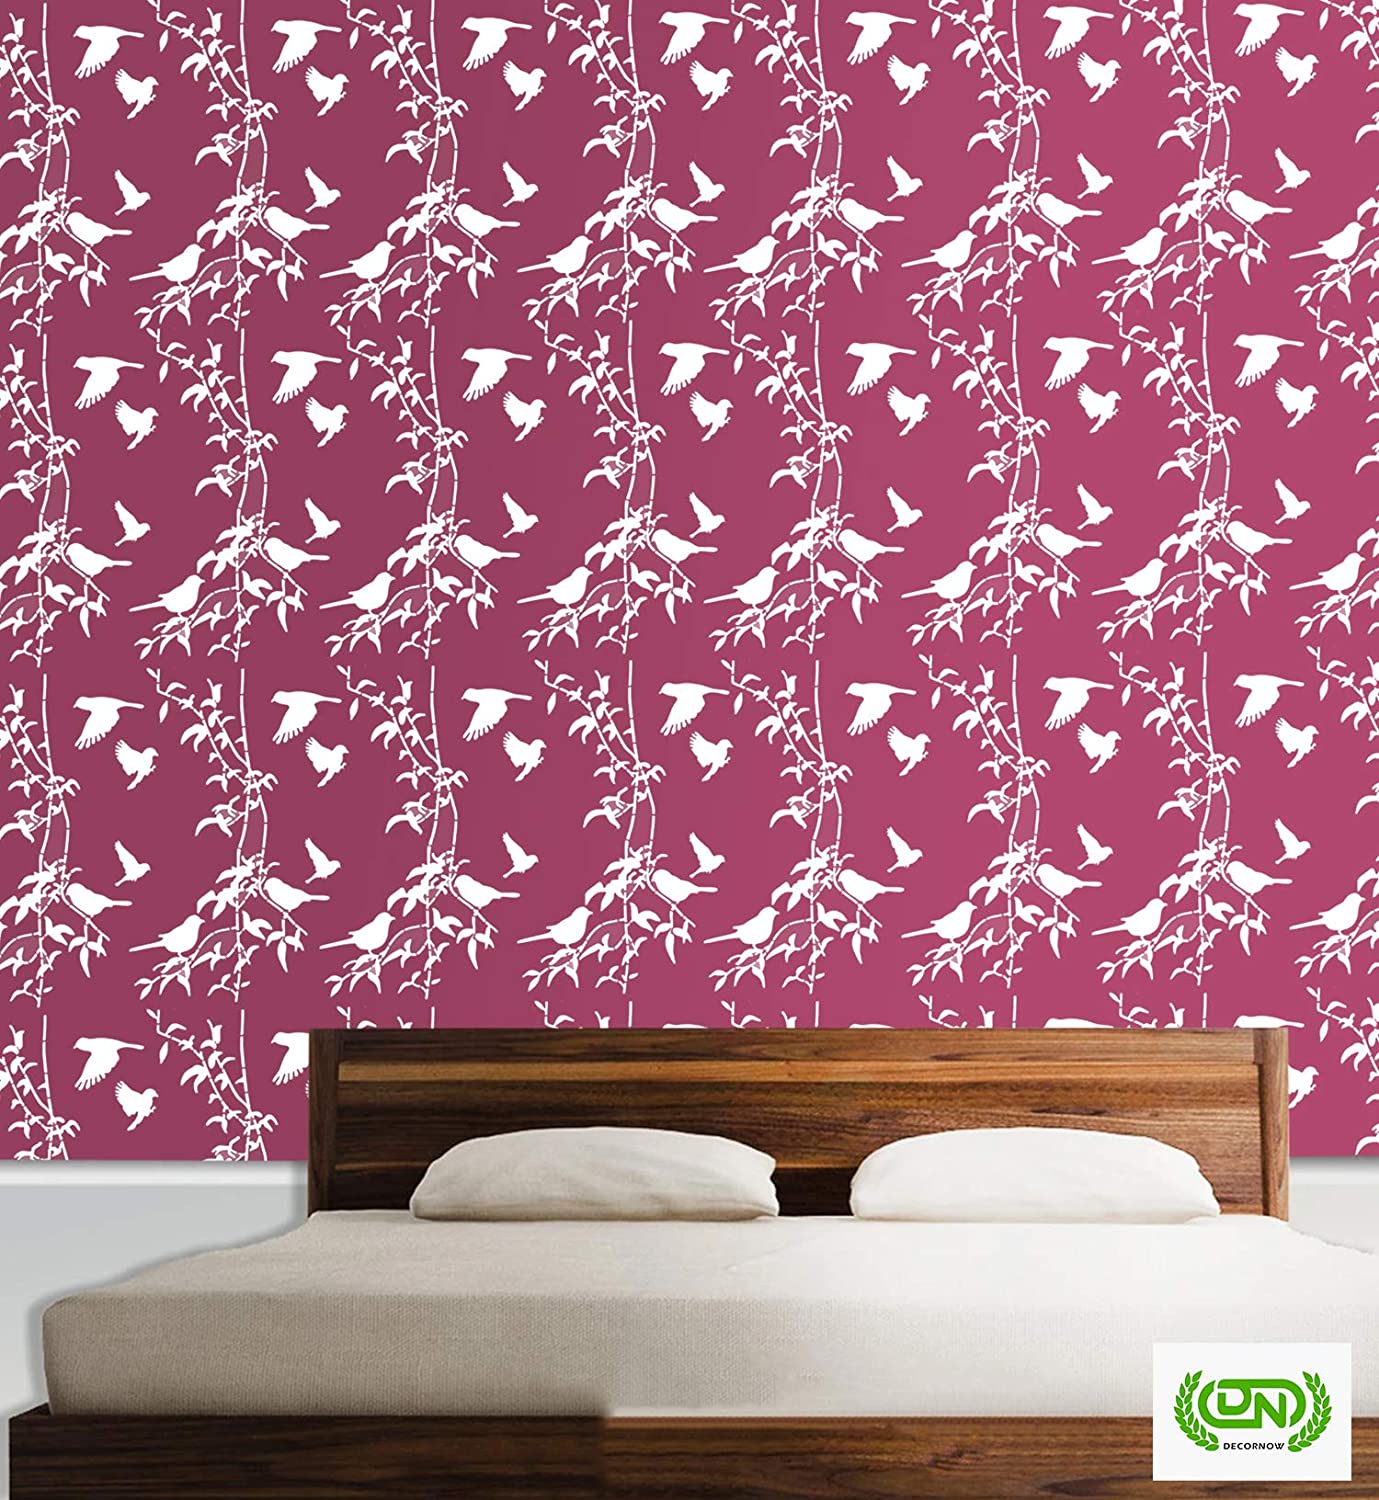 Creepers And Birds Wall Design Stencil (KHSNT101)